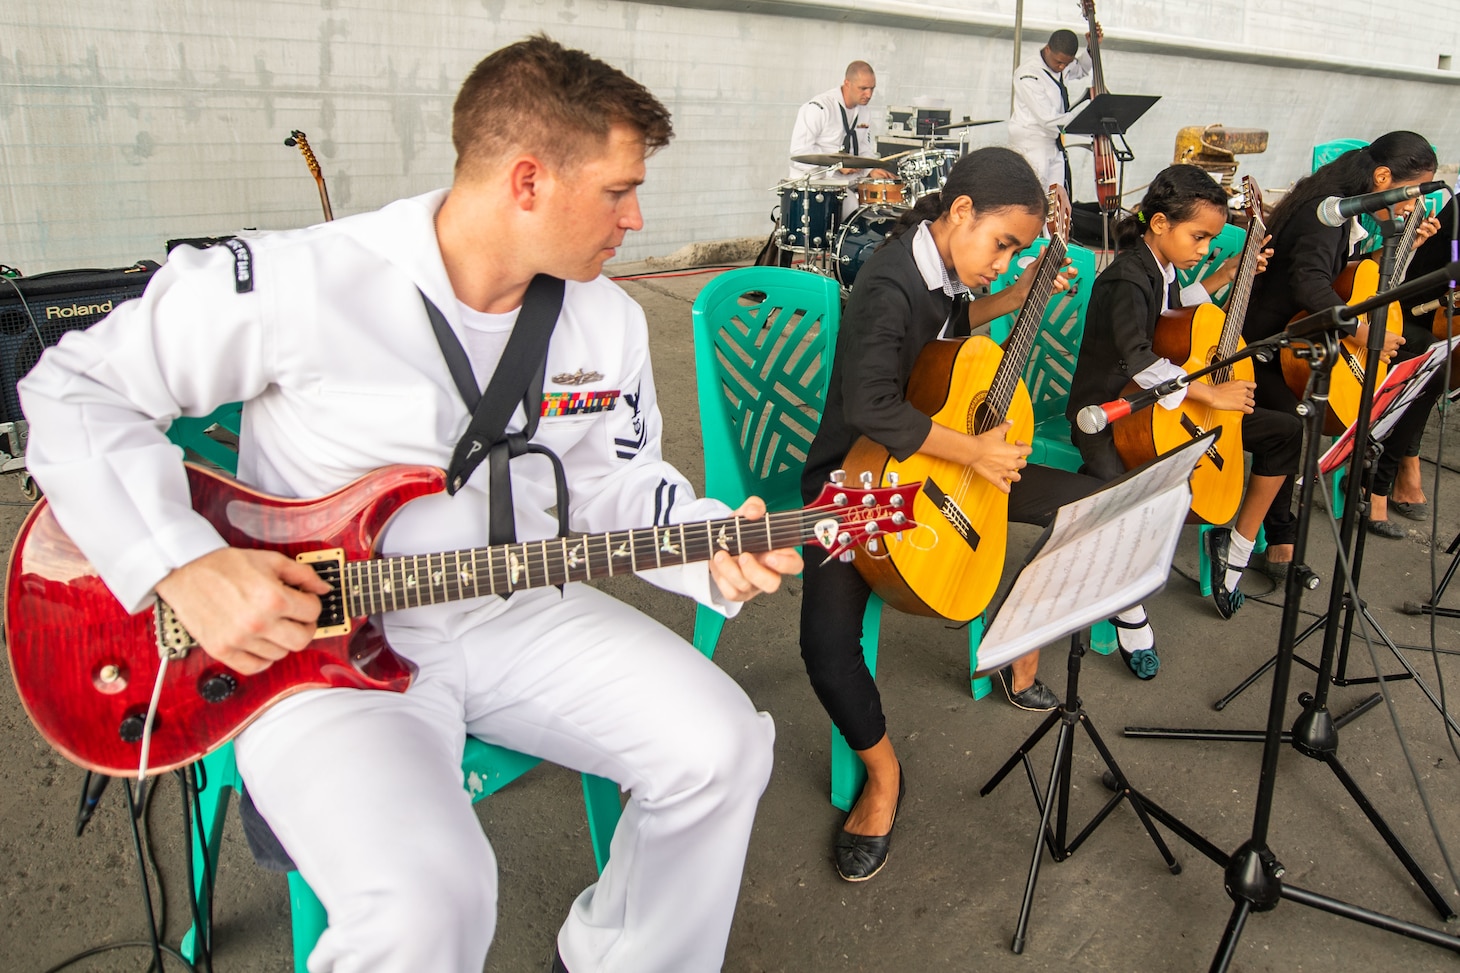 DILI, Timor-Leste (May 3, 2019) – U.S. Navy Musician 2nd Class Daniel Weber, assigned to the U.S. Pacific Fleet Band, performs with students from the Safrei Music School during the Pacific Partnership 2019 closing ceremony for Timor-Leste. Pacific Partnership, now in its 14th iteration, is the largest annual multinational humanitarian assistance and disaster relief preparedness mission conducted in the Indo-Pacific. Each year the mission team works collectively with host and partner nations to enhance regional interoperability and disaster response capabilities, increase security and stability in the region, and foster new and enduring friendships in the Indo-Pacific.